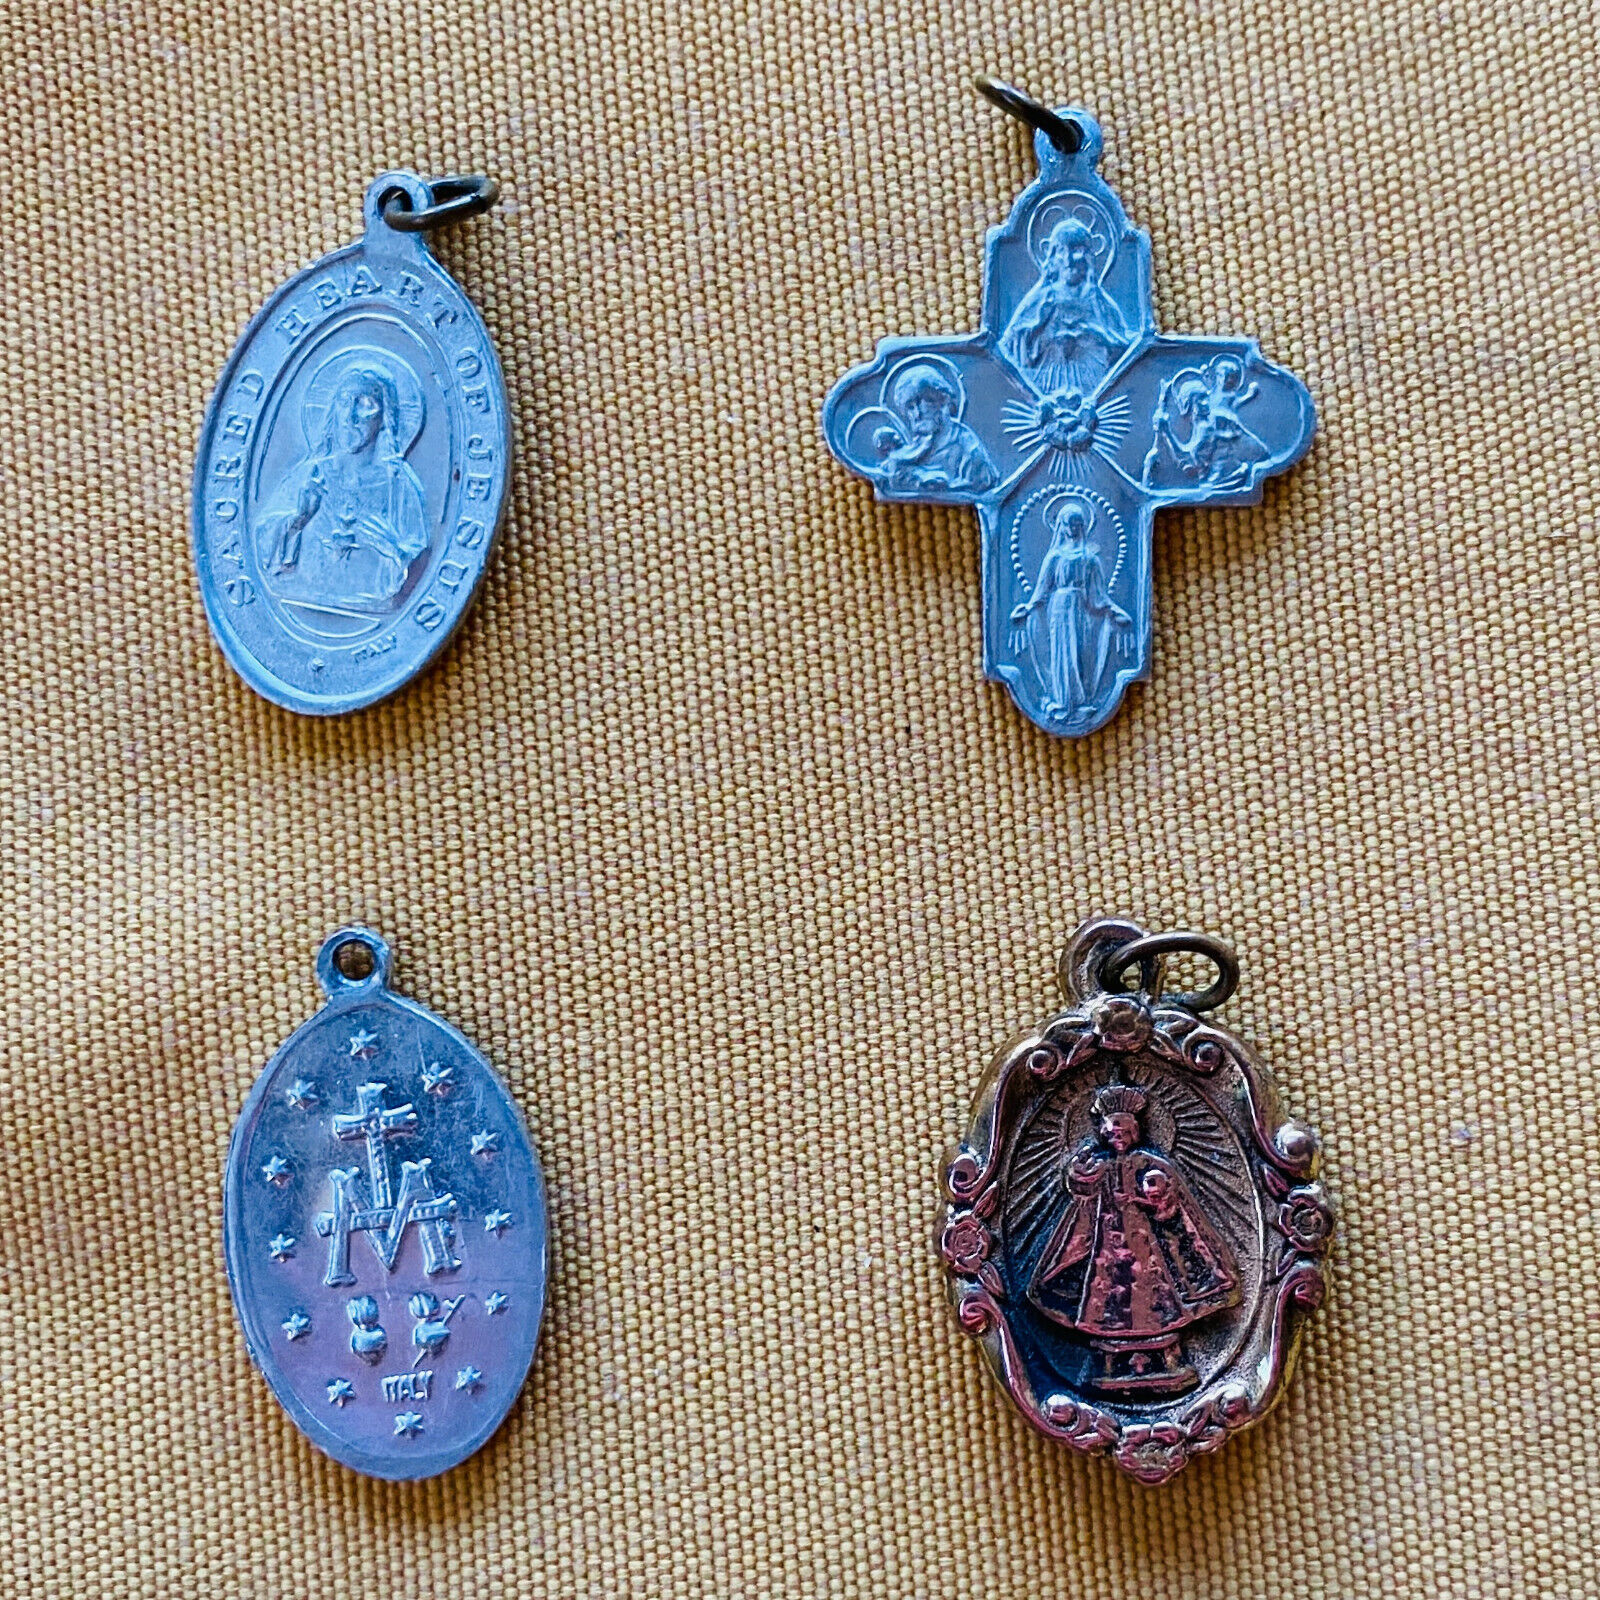 4 Vtg Religious Christian Medals Ifnfant Jesus Of Prague Our Lady Of Carmel Mary